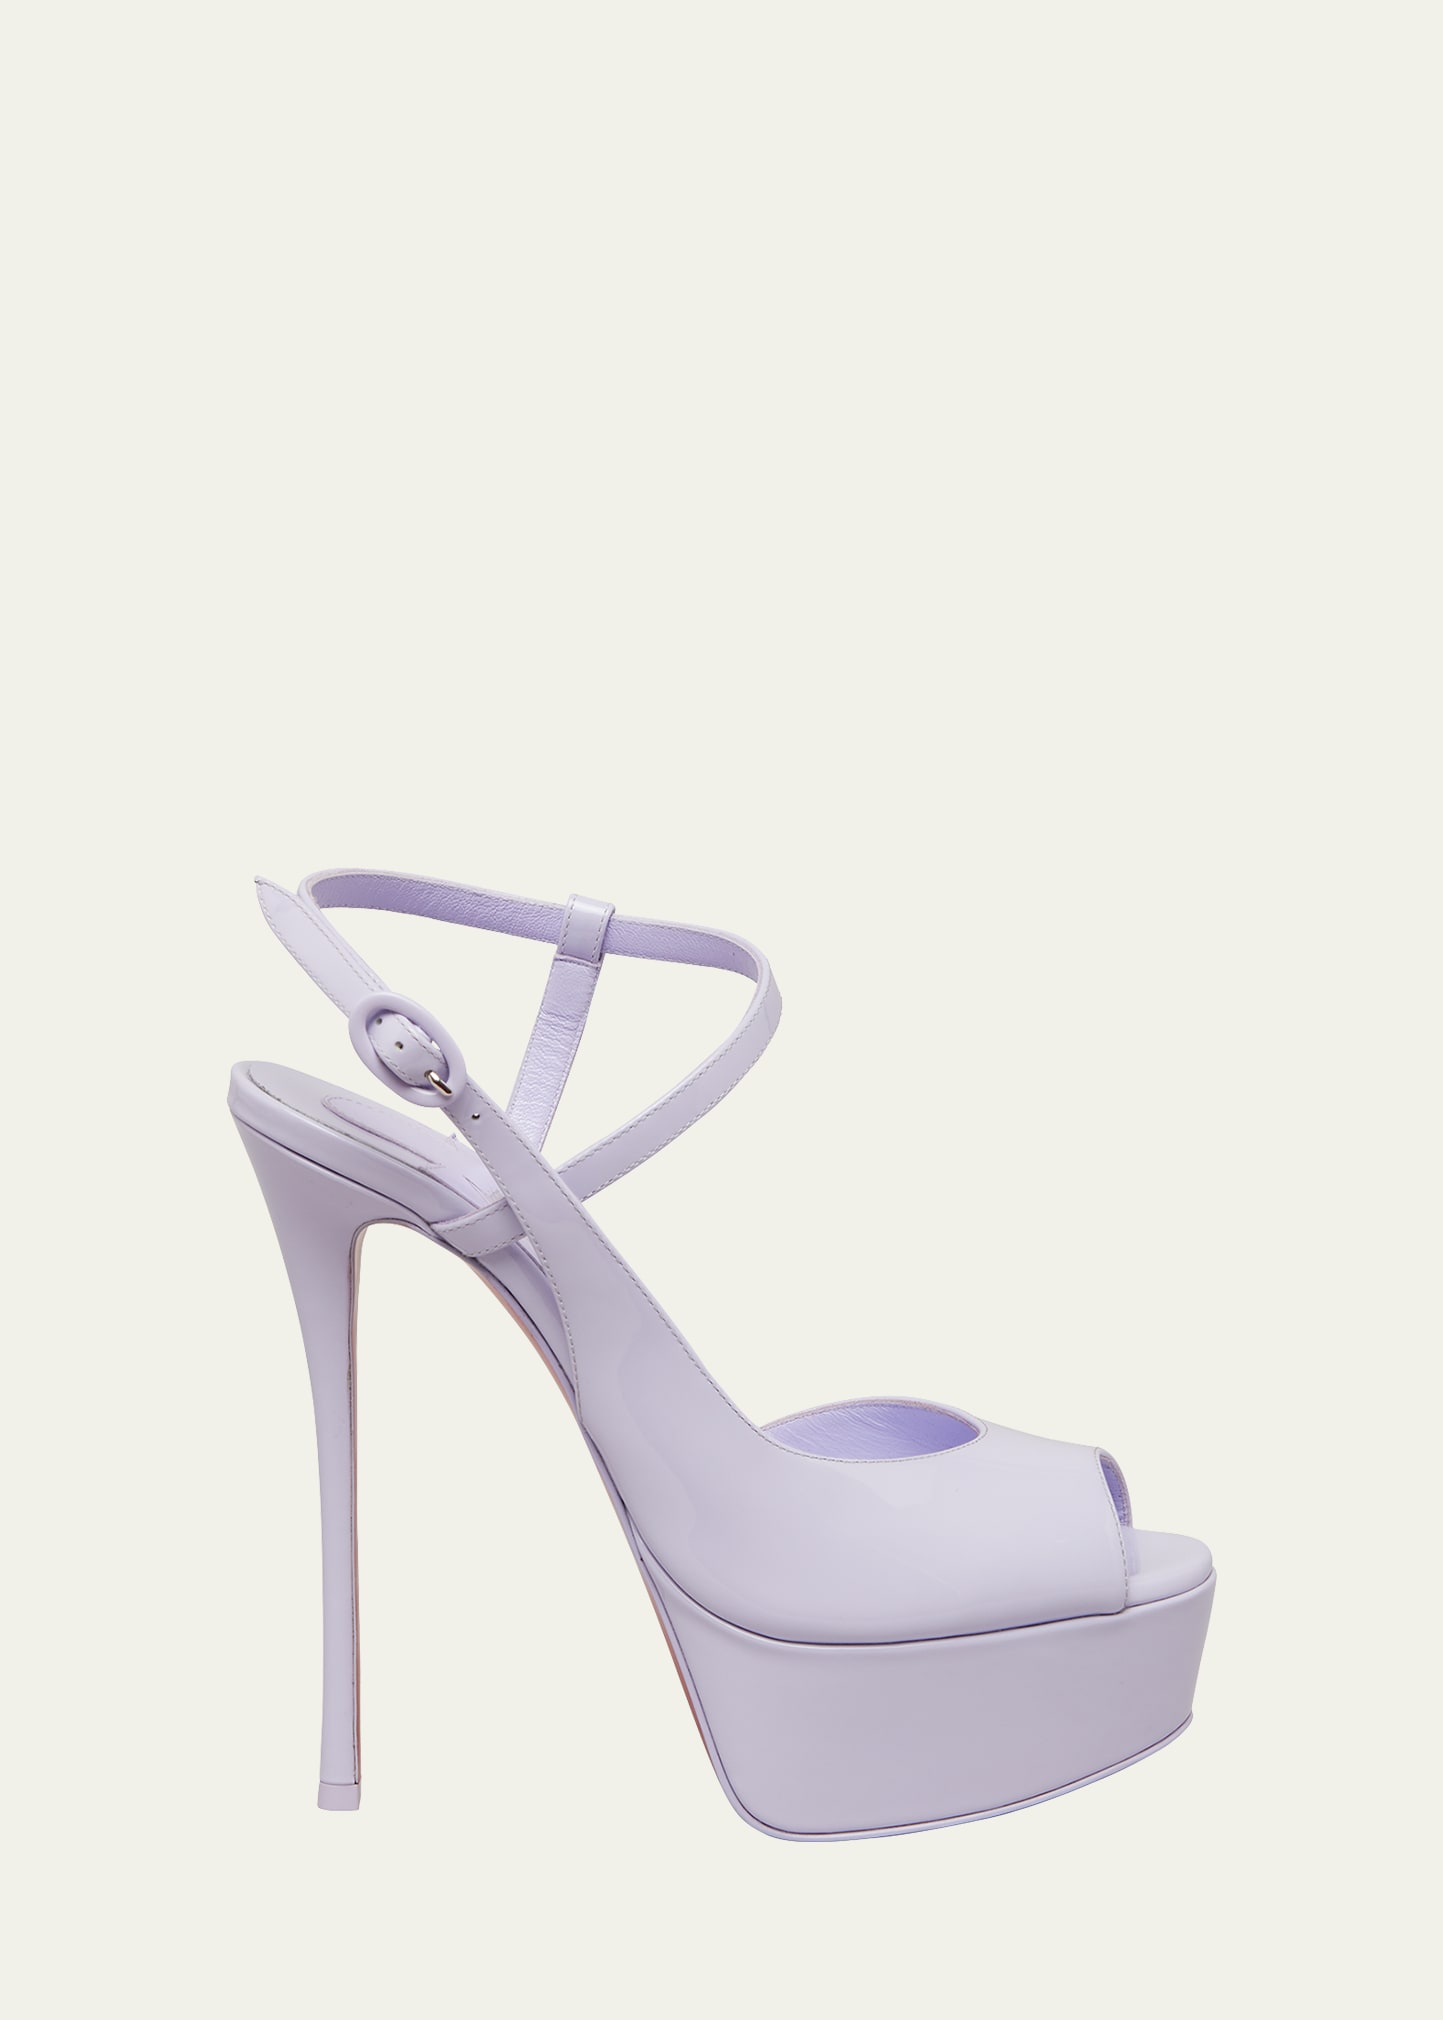 Christian Louboutin So Jenlove Patent Asymmetrical Red Sole Sandals In Lilac Smoke